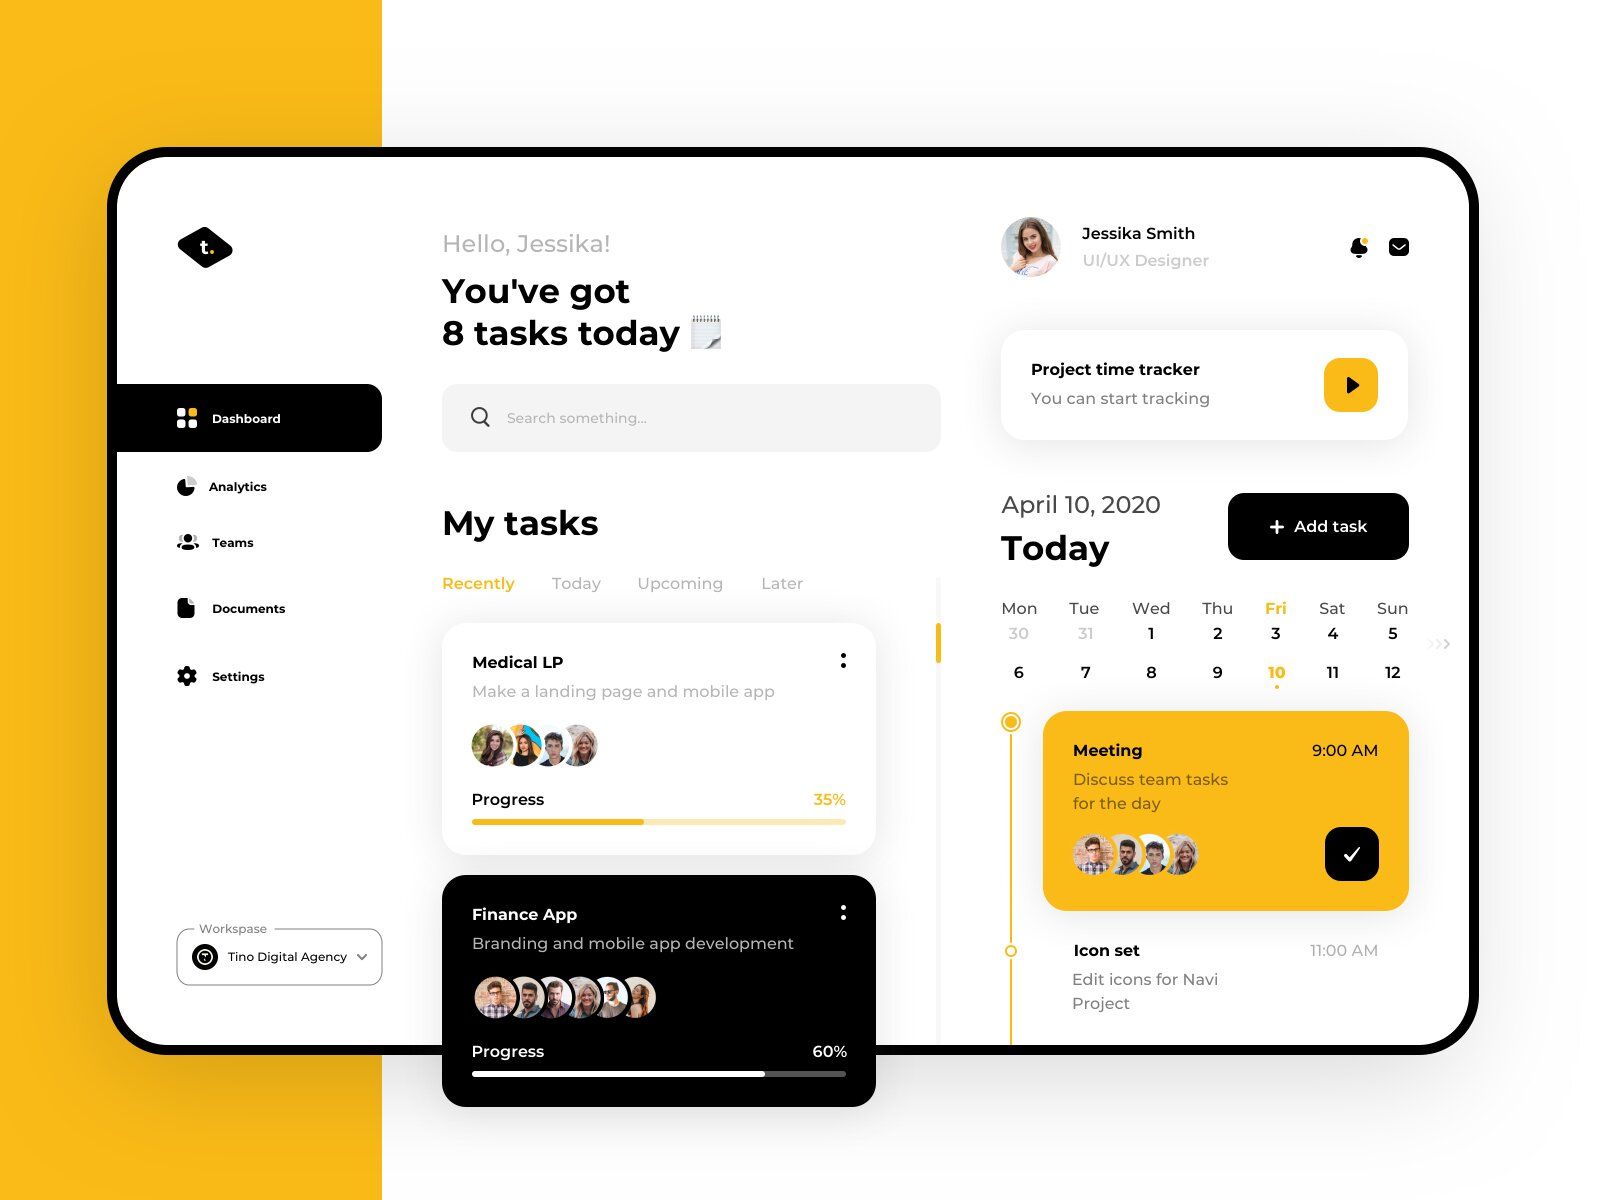 Legal software development services for a law firm often offer legal mobile app development in addition for a flawless working process for each user (*image by [Anastasia](https://dribbble.com/anastasia-tino){ rel="nofollow" target="_blank" .default-md}*)